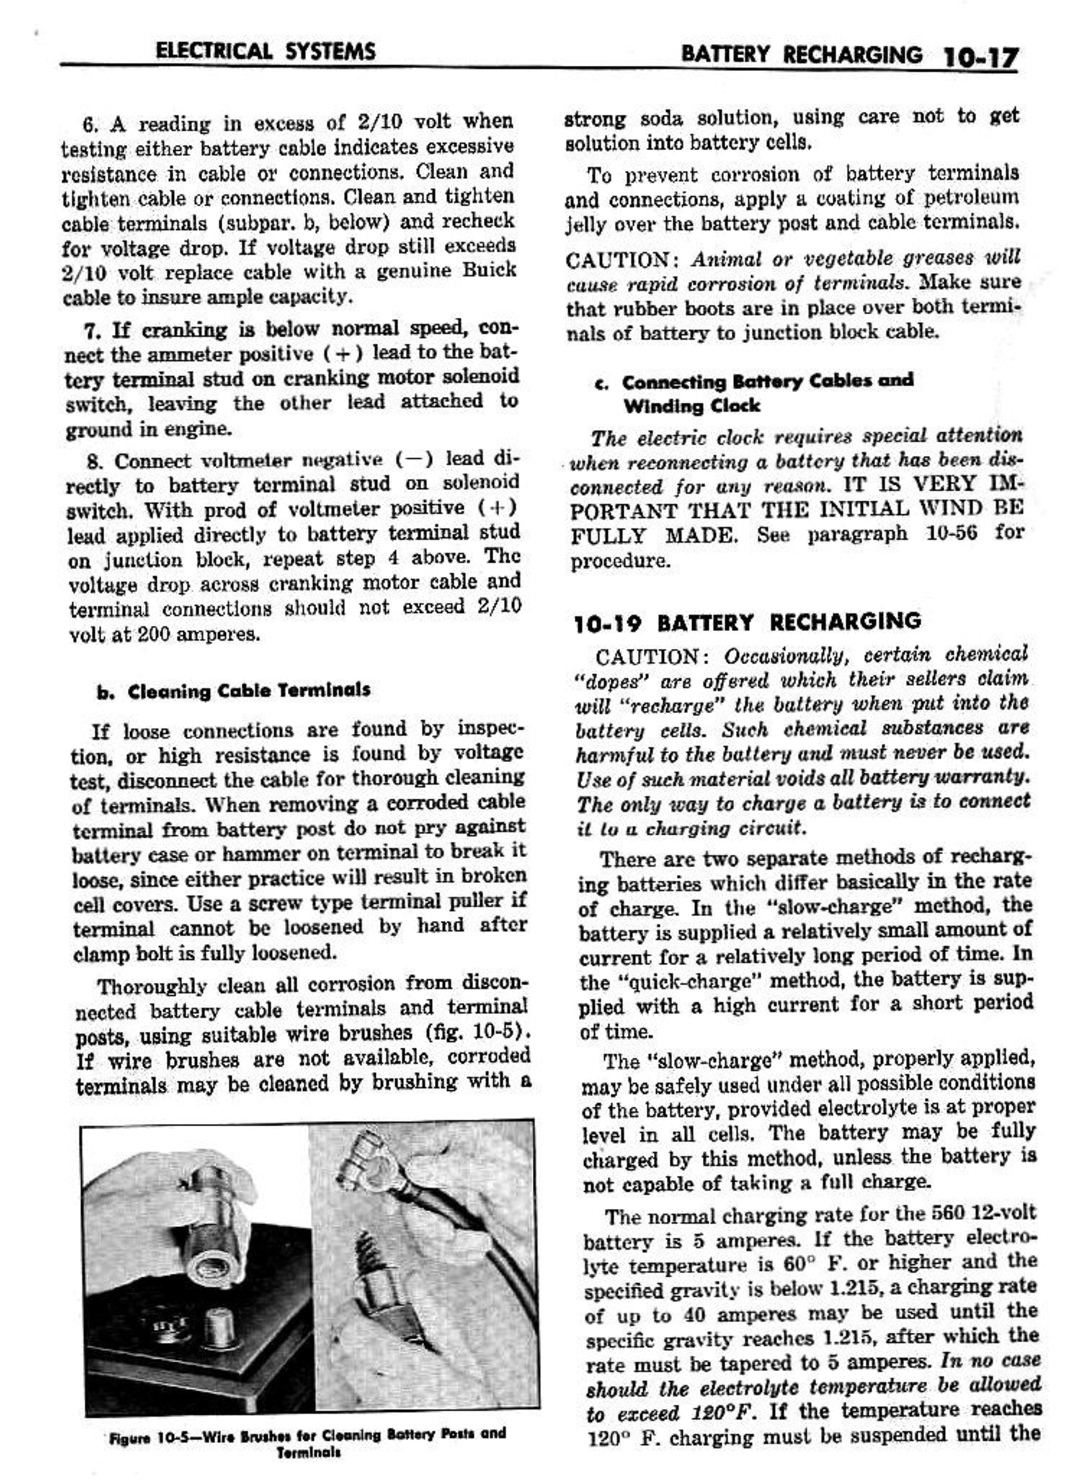 n_11 1959 Buick Shop Manual - Electrical Systems-017-017.jpg